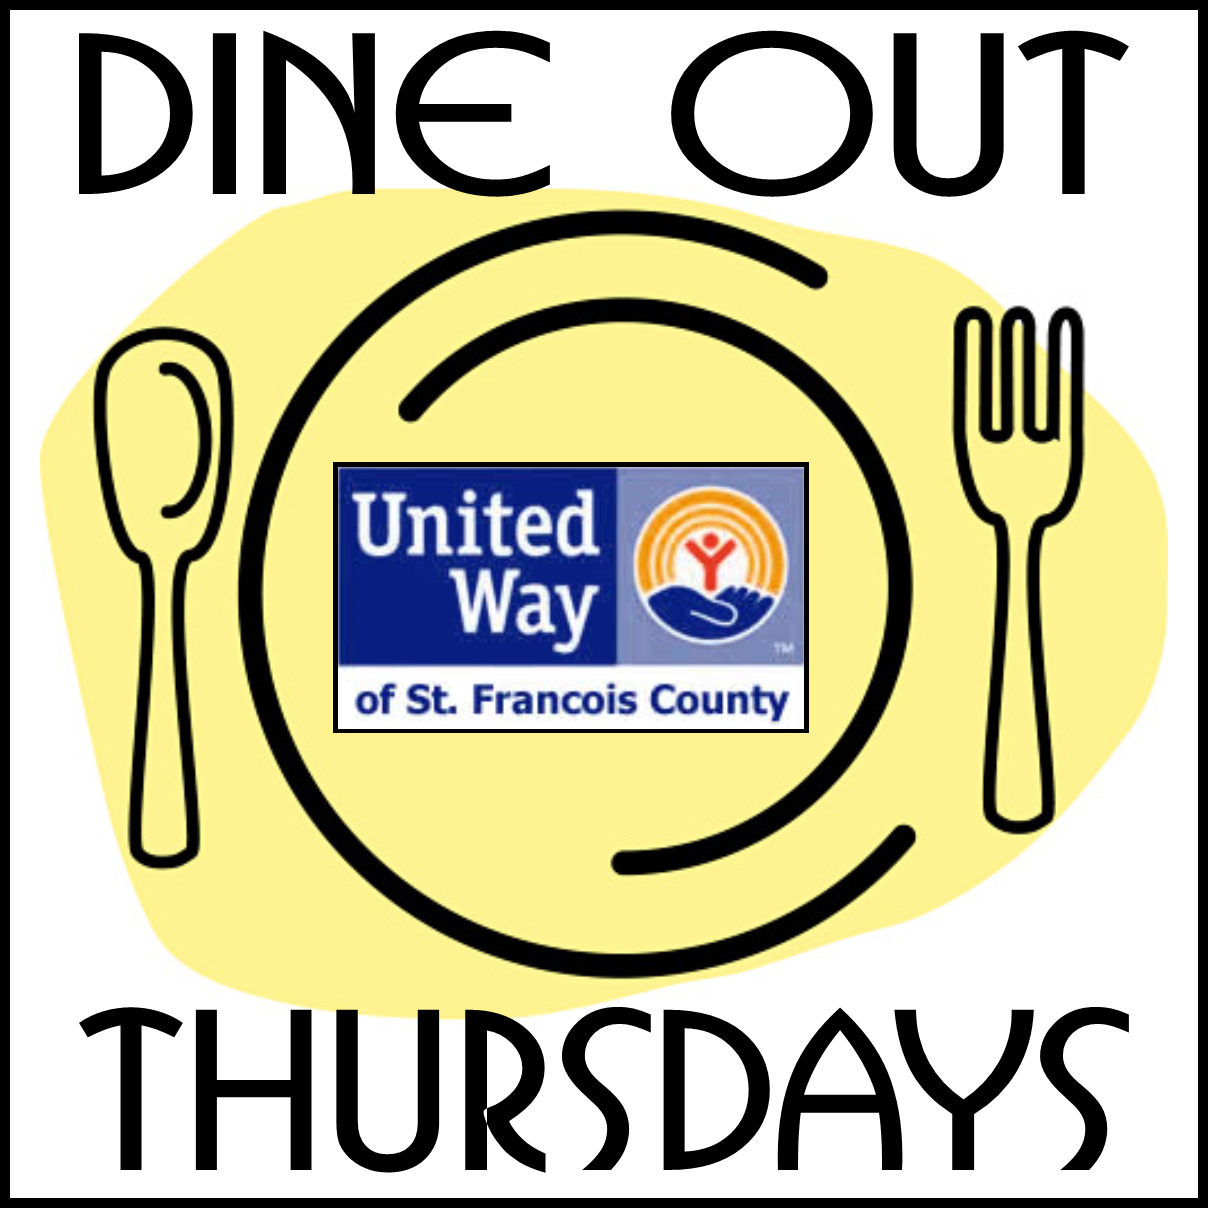 Dine Out Thursday for United Way at Shogun Japanese Steak House or Qdoba Mexican Eats